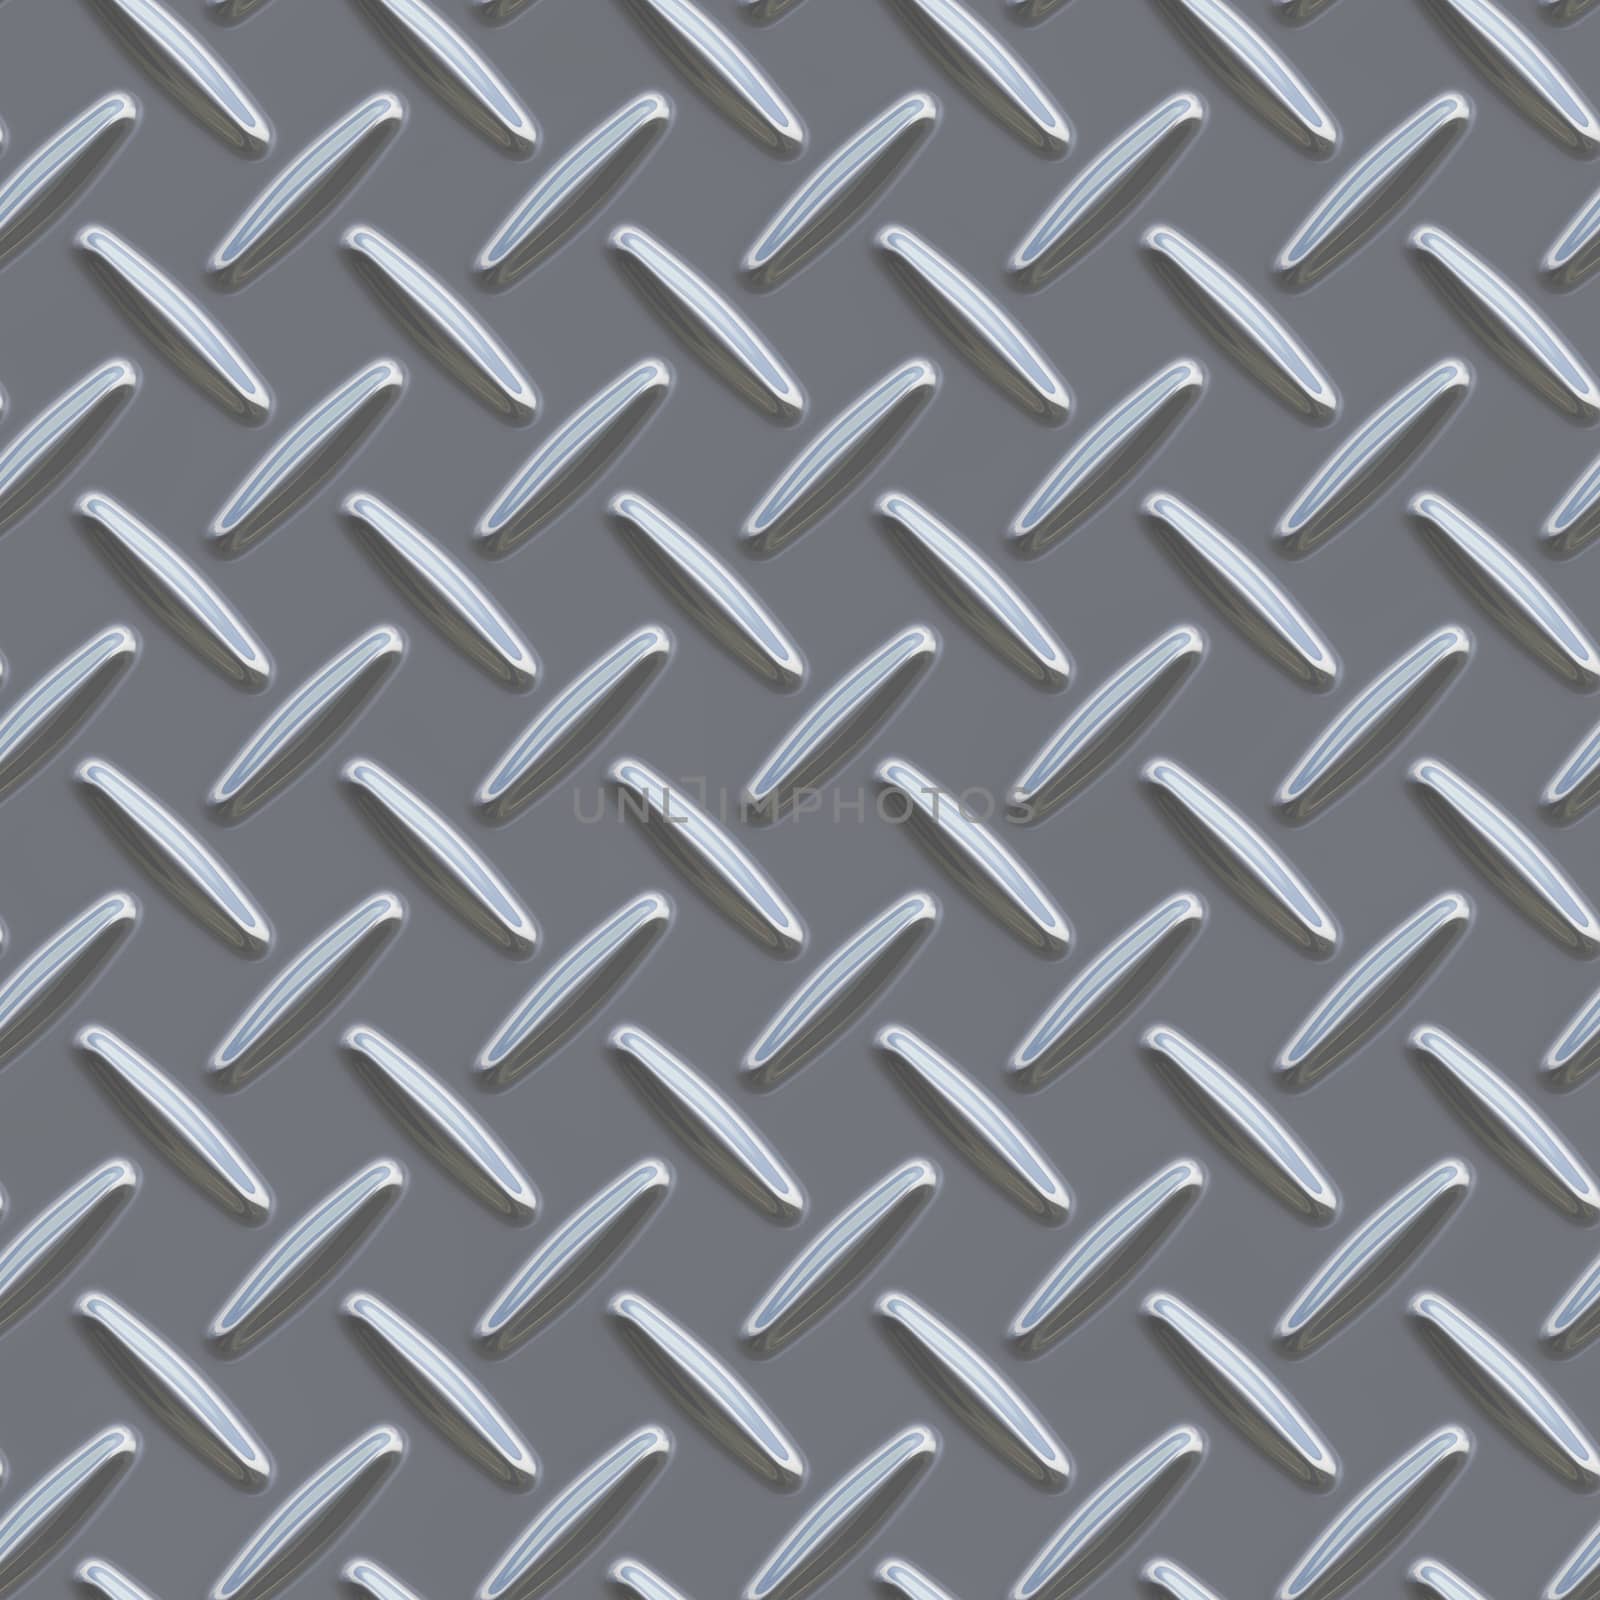 Silver Gray Metal Plate Seamless Texture by whitechild